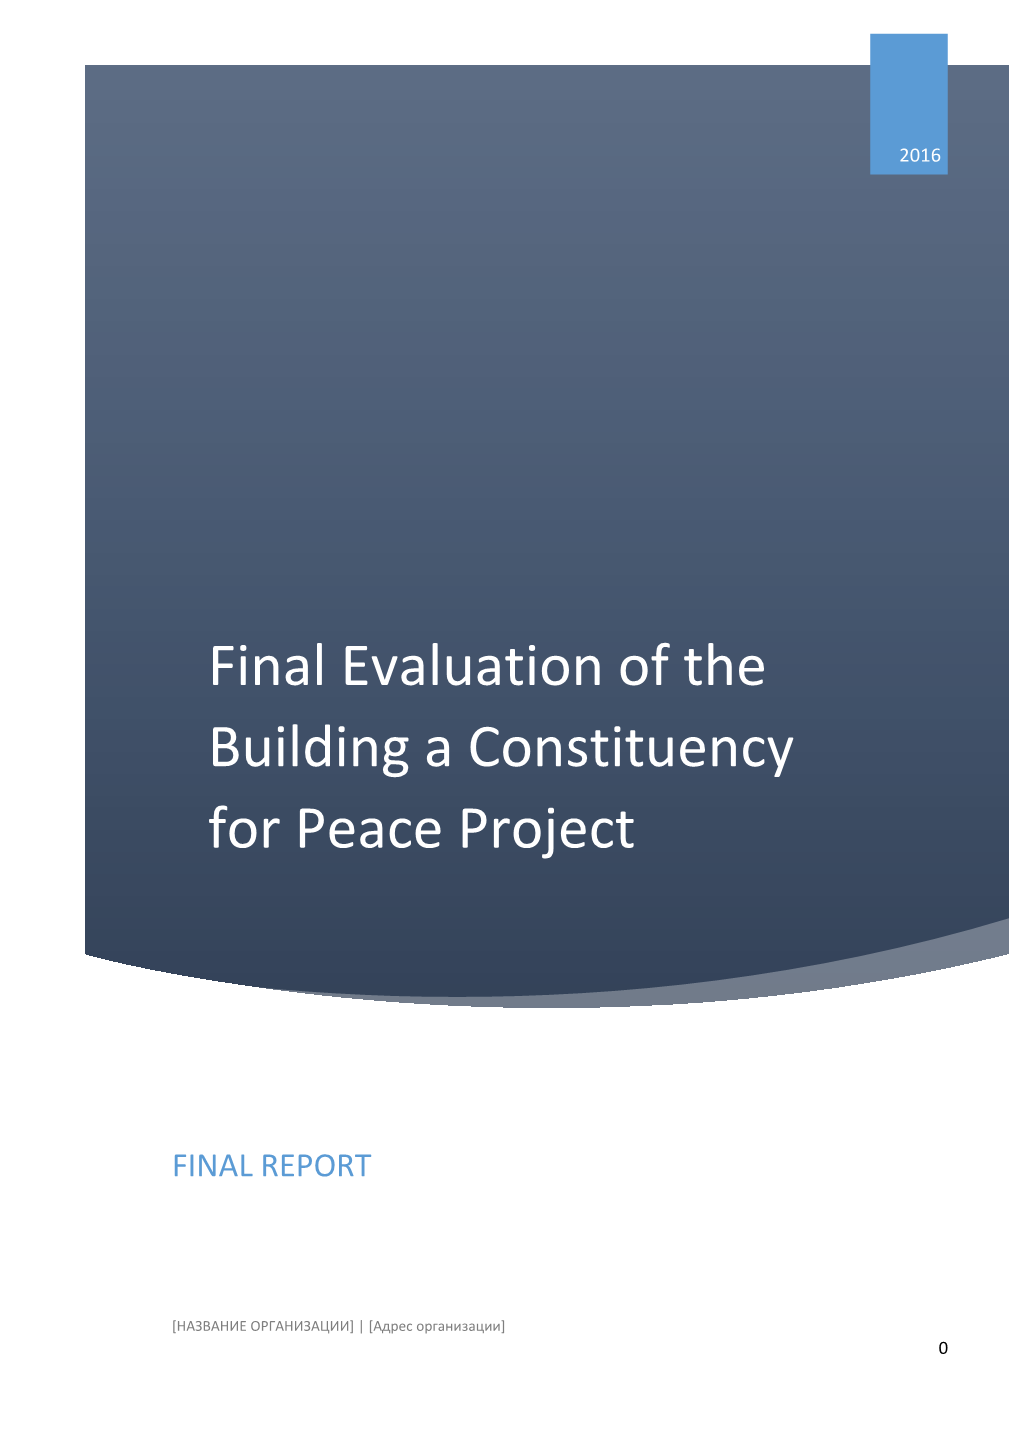 Final Evaluation of the Building a Constituency for Peace Project